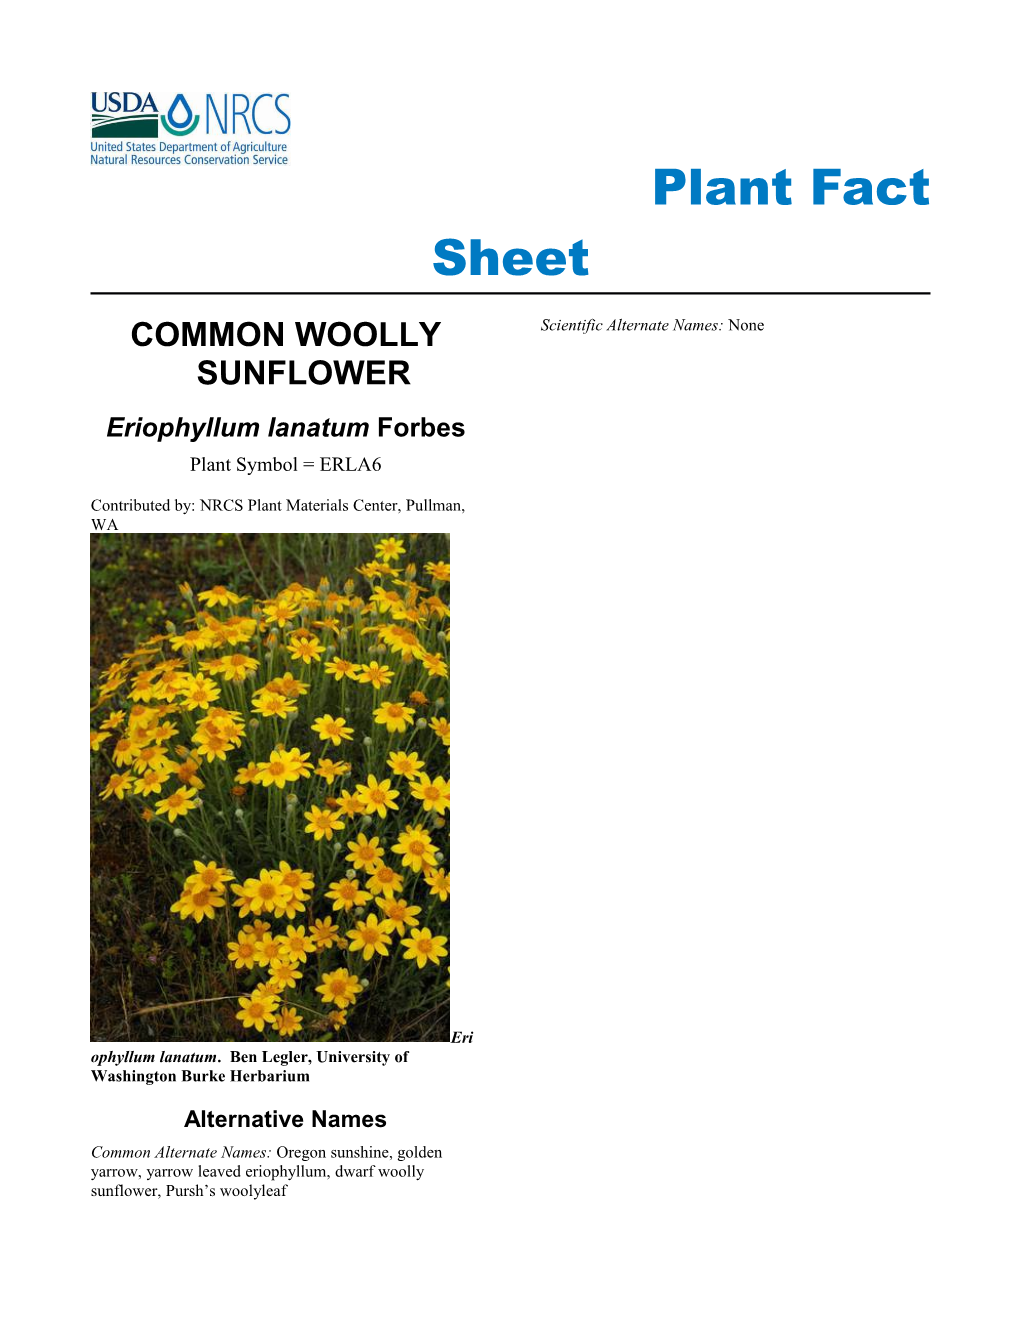 Plant Fact Sheet for Common Woolly Sunflower